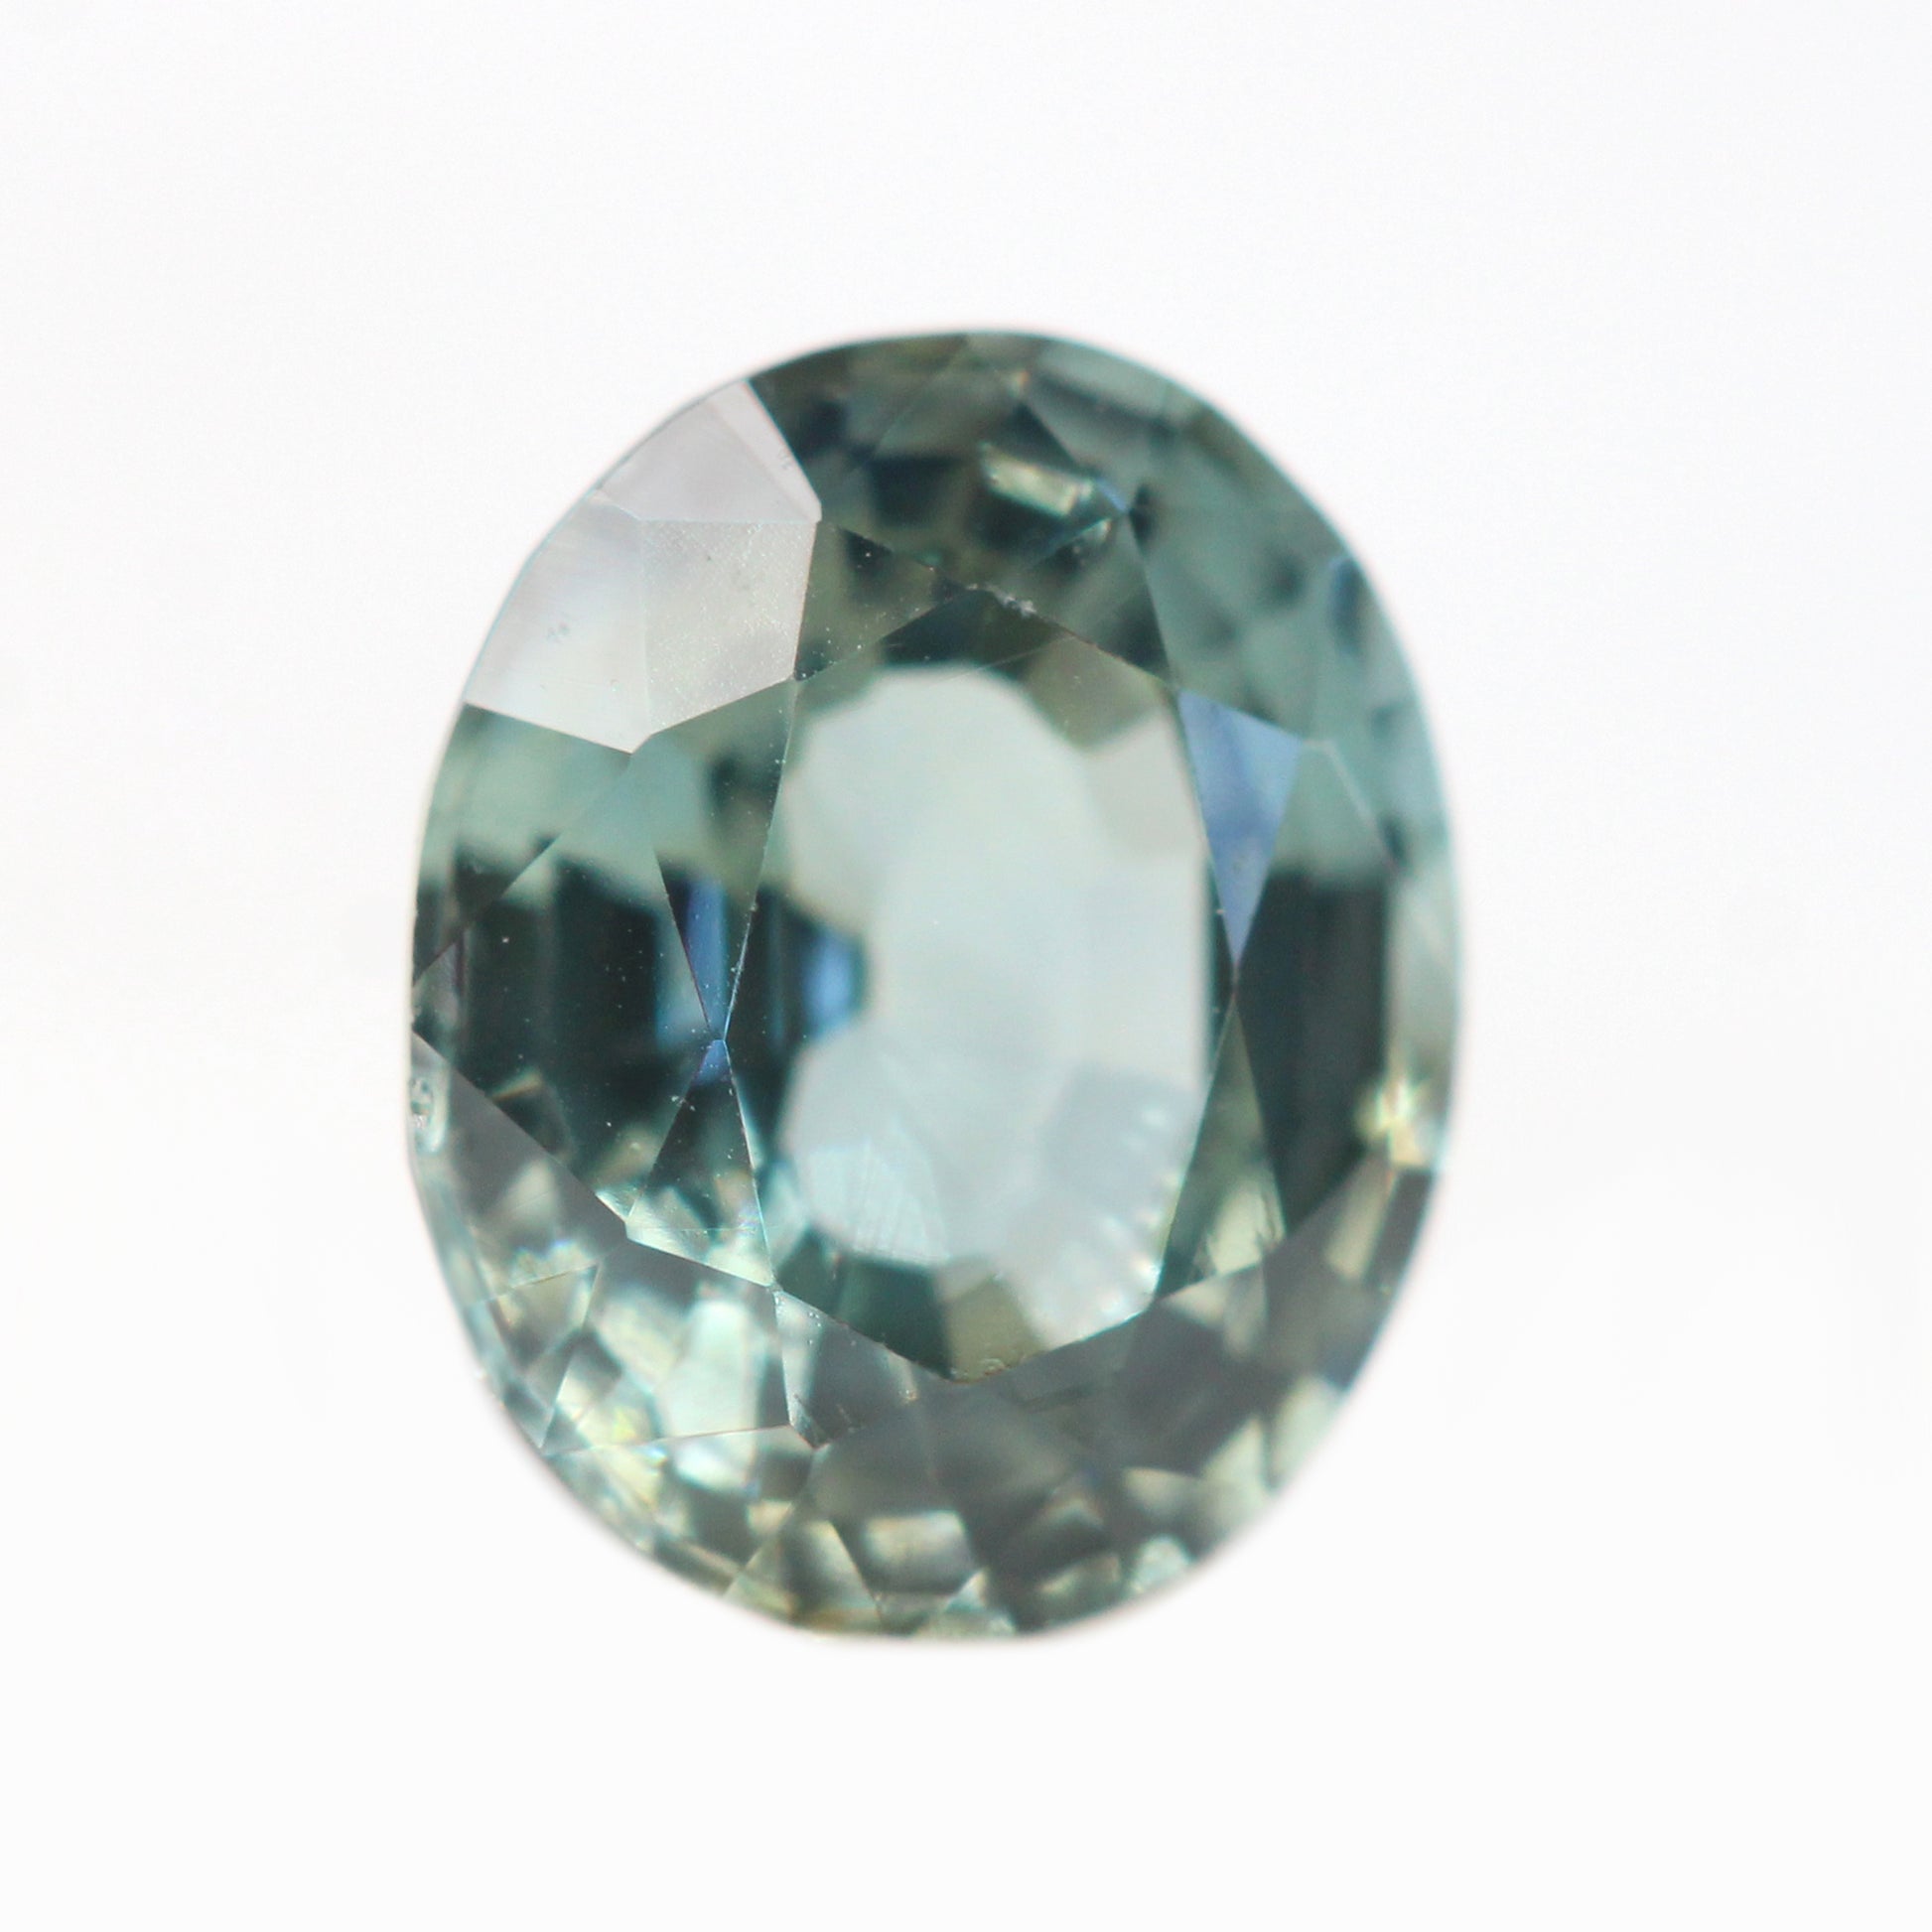 0.81 Carat Light Earthy Teal Oval Sapphire for Custom Work - Inventory Code TOS081 - Midwinter Co. Alternative Bridal Rings and Modern Fine Jewelry